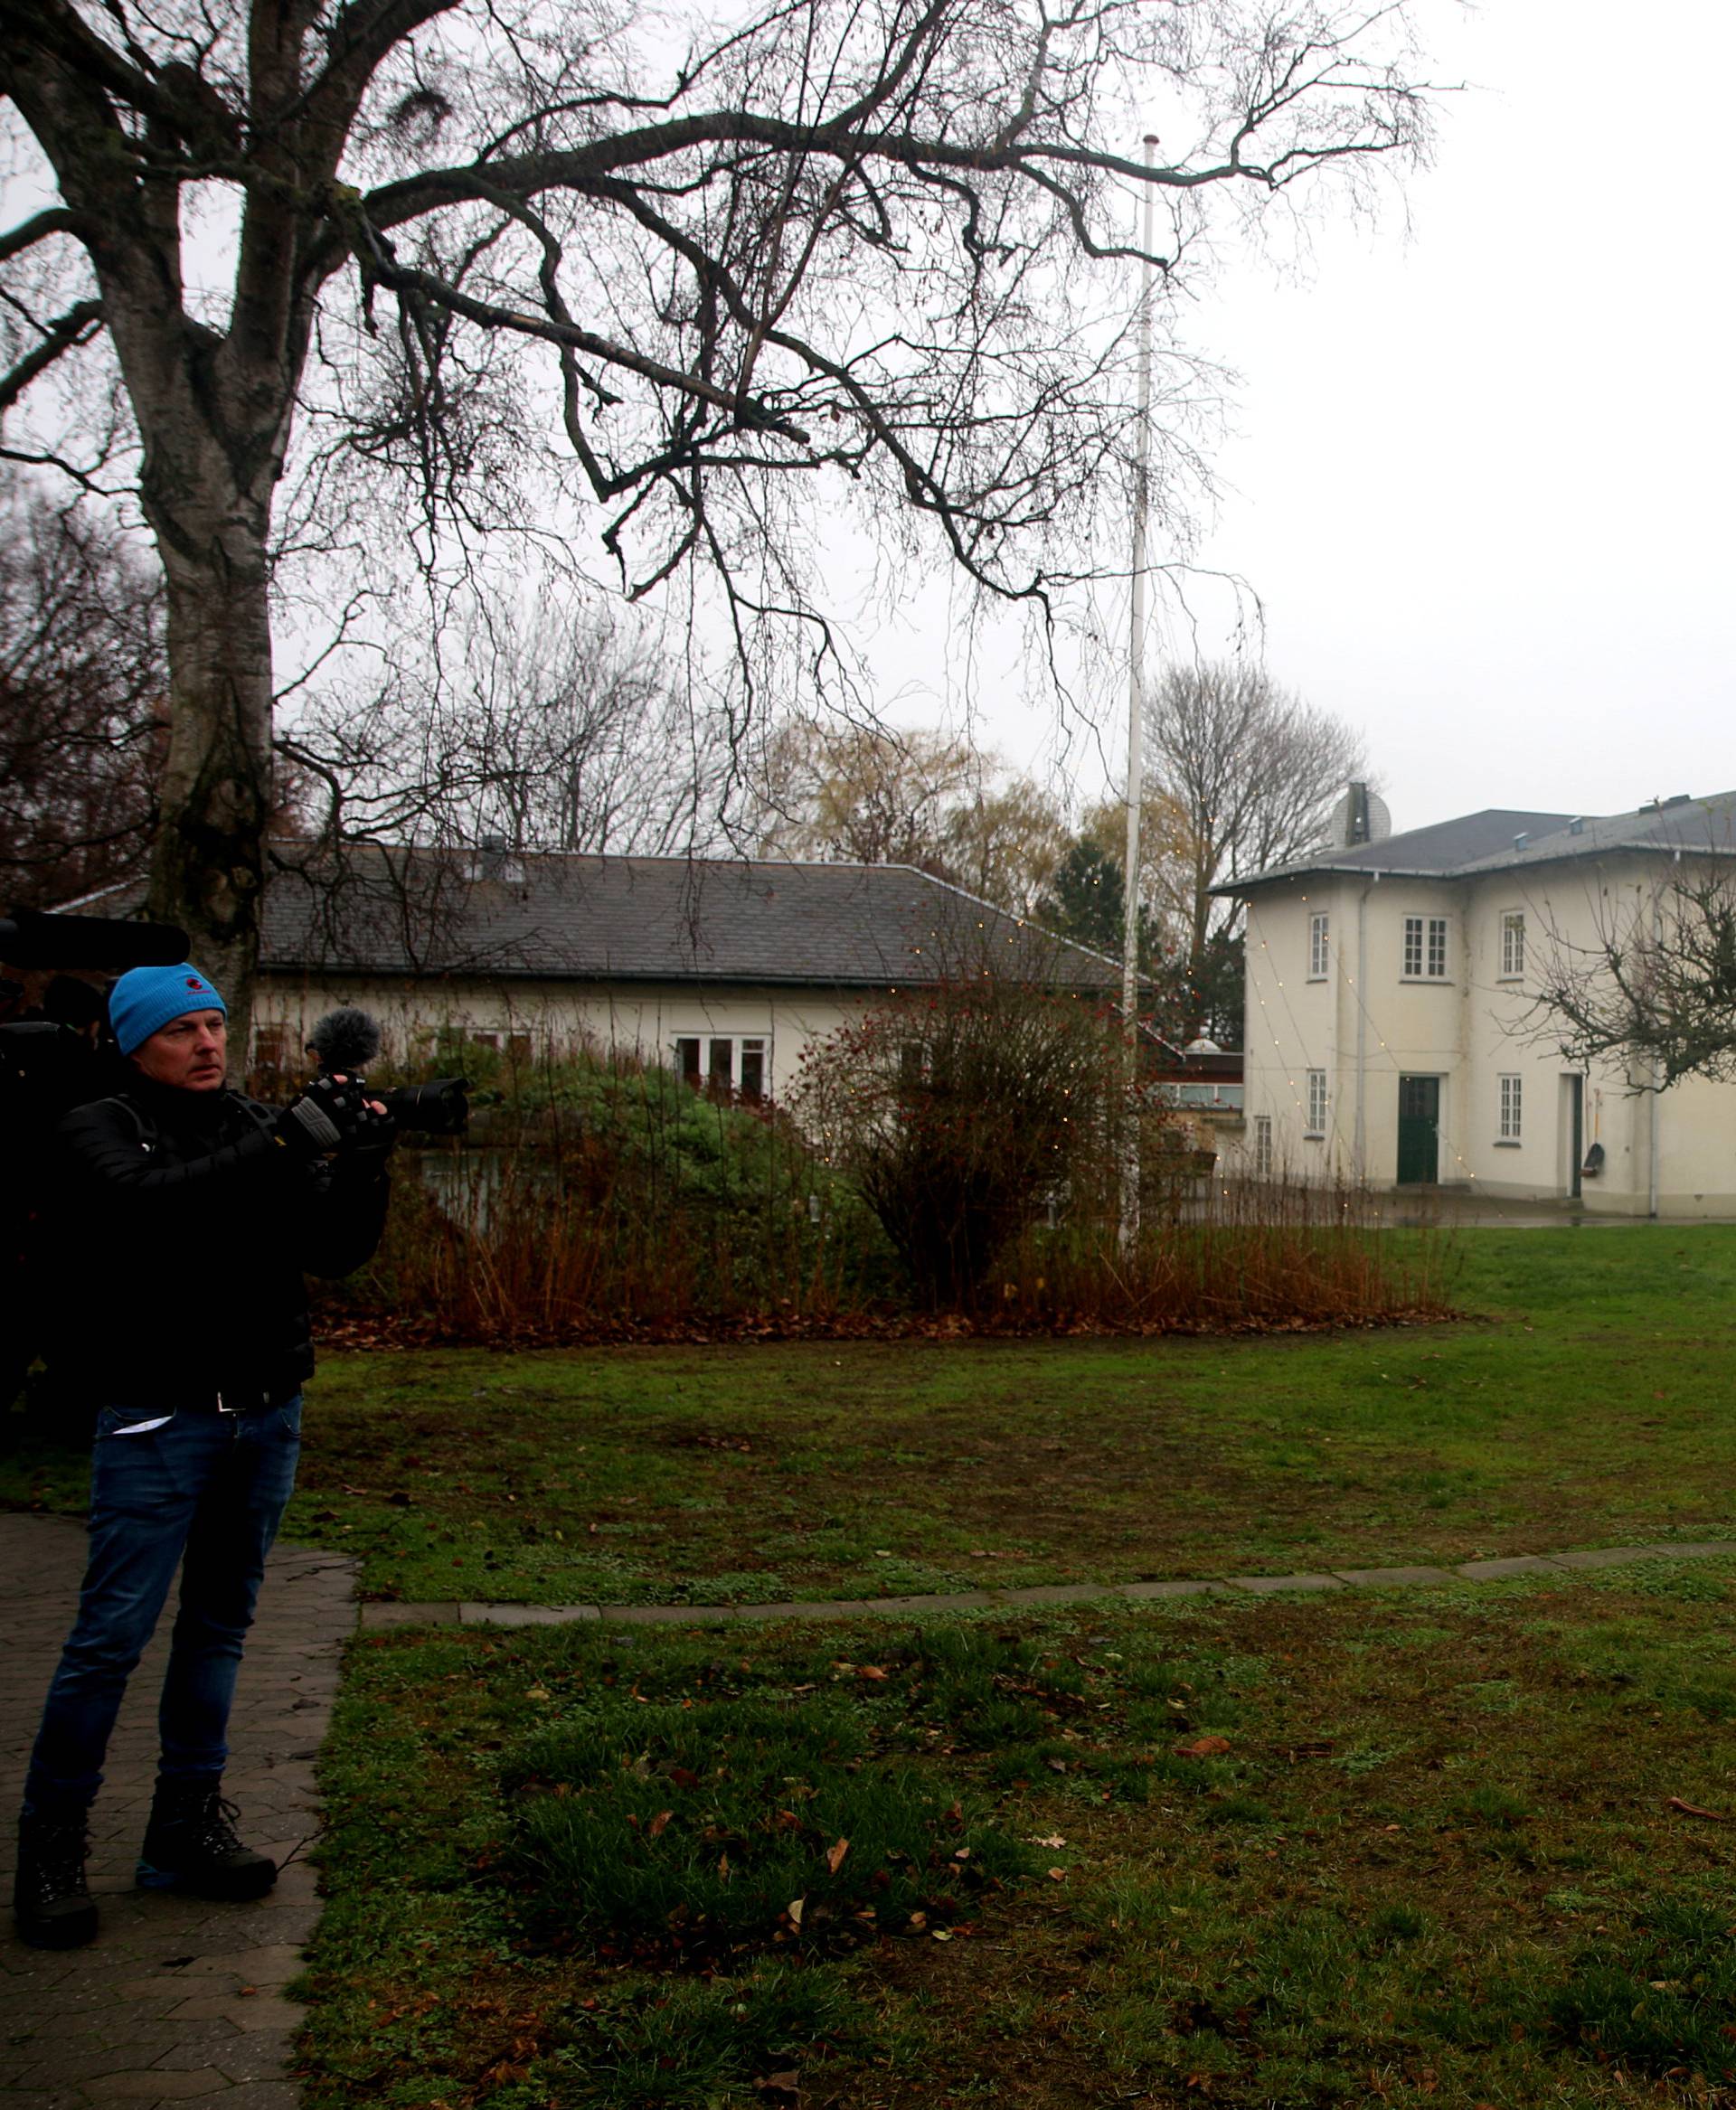 A cameraman takes a picture on Lindholm Island